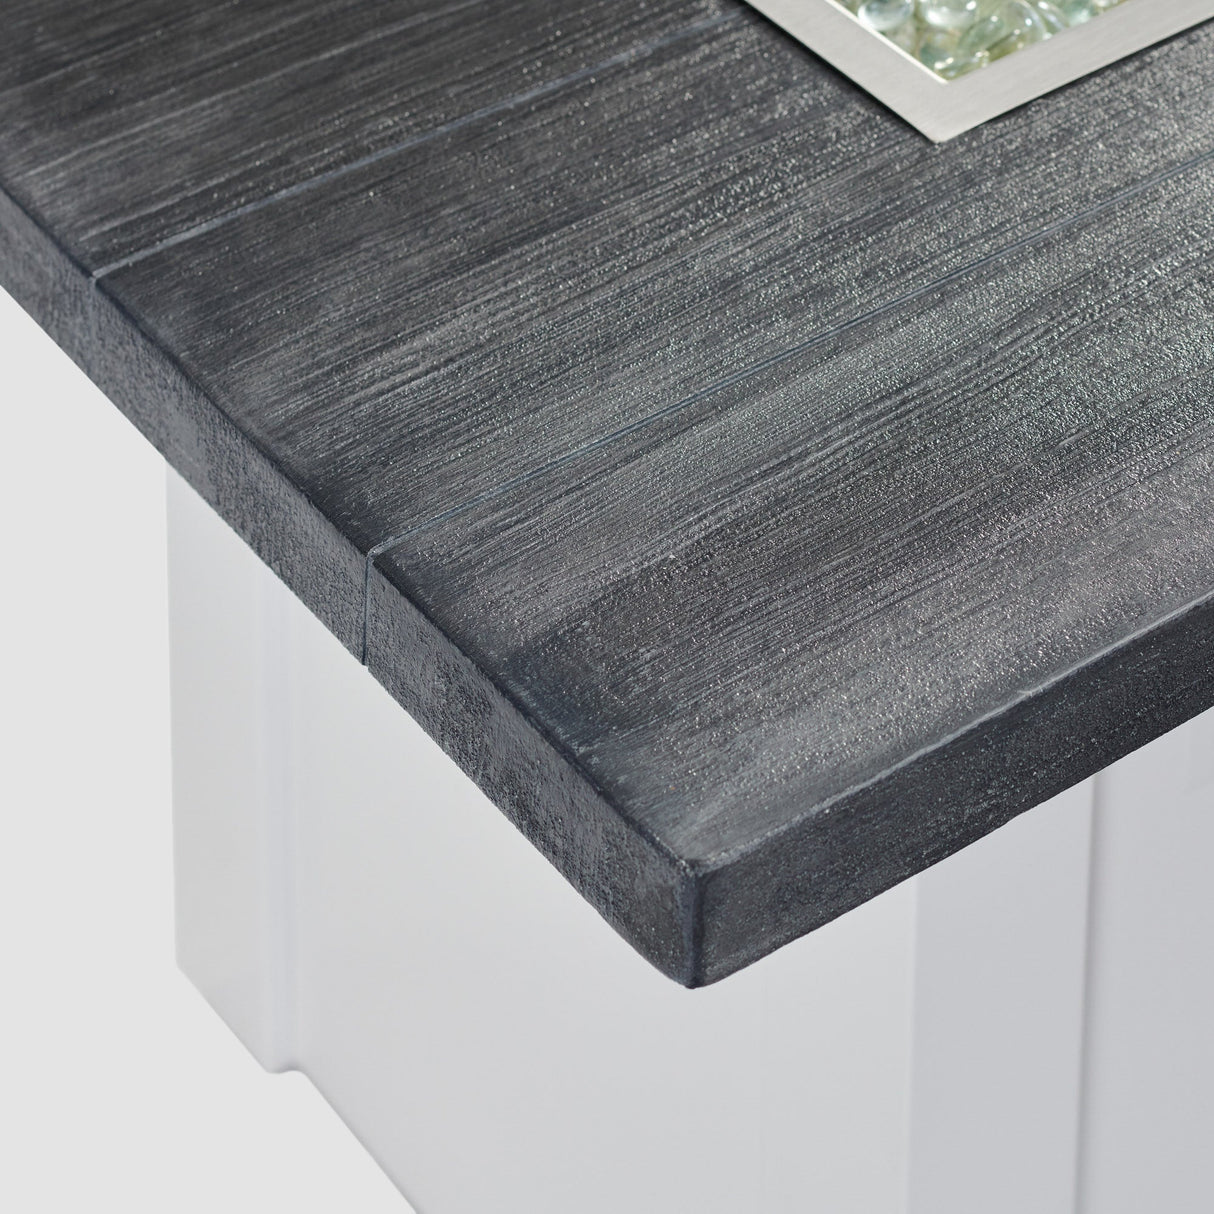 A close up view of the detail found on the top of a Havenwood Linear Gas Fire Pit Table with a Carbon Grey top and White base